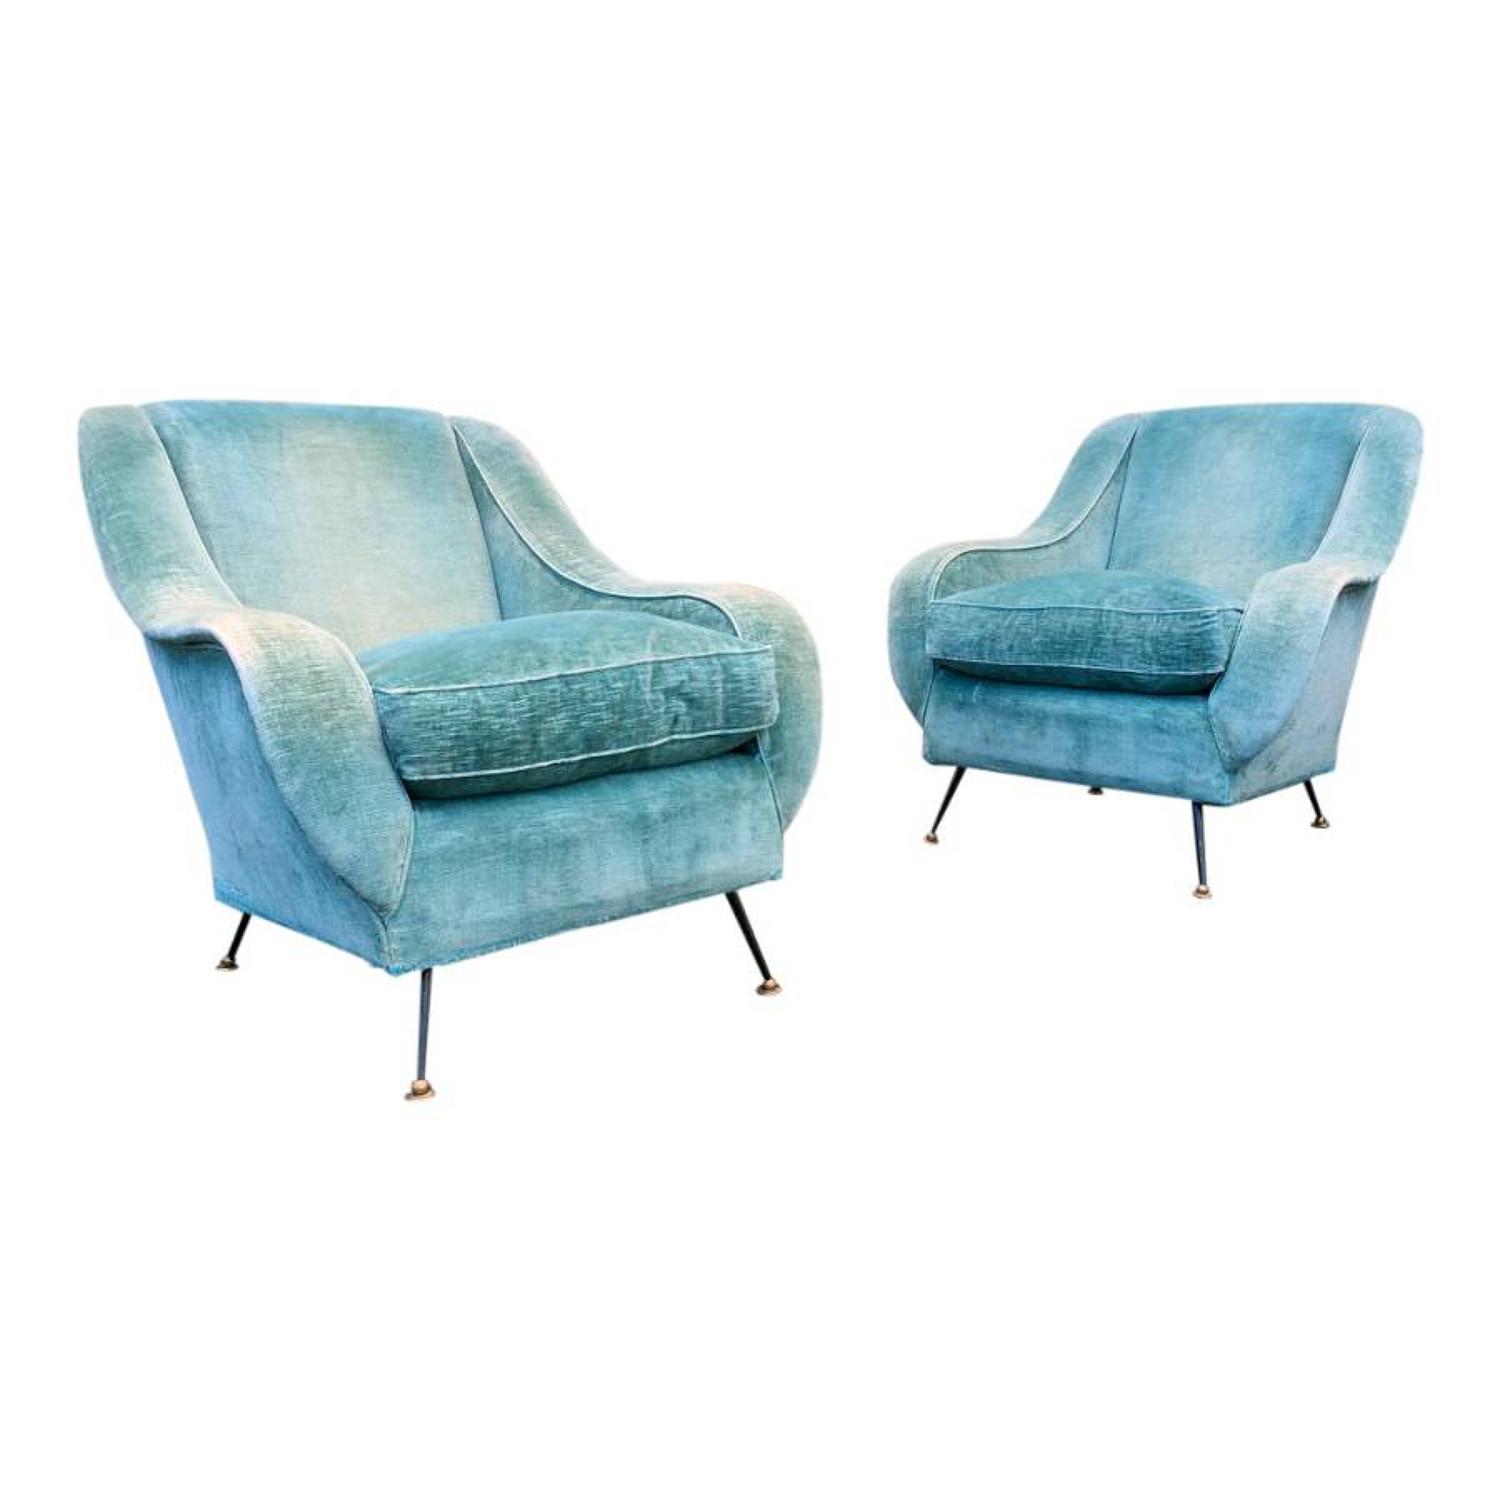 A pair of 1950s Italian armchairs with brass feet